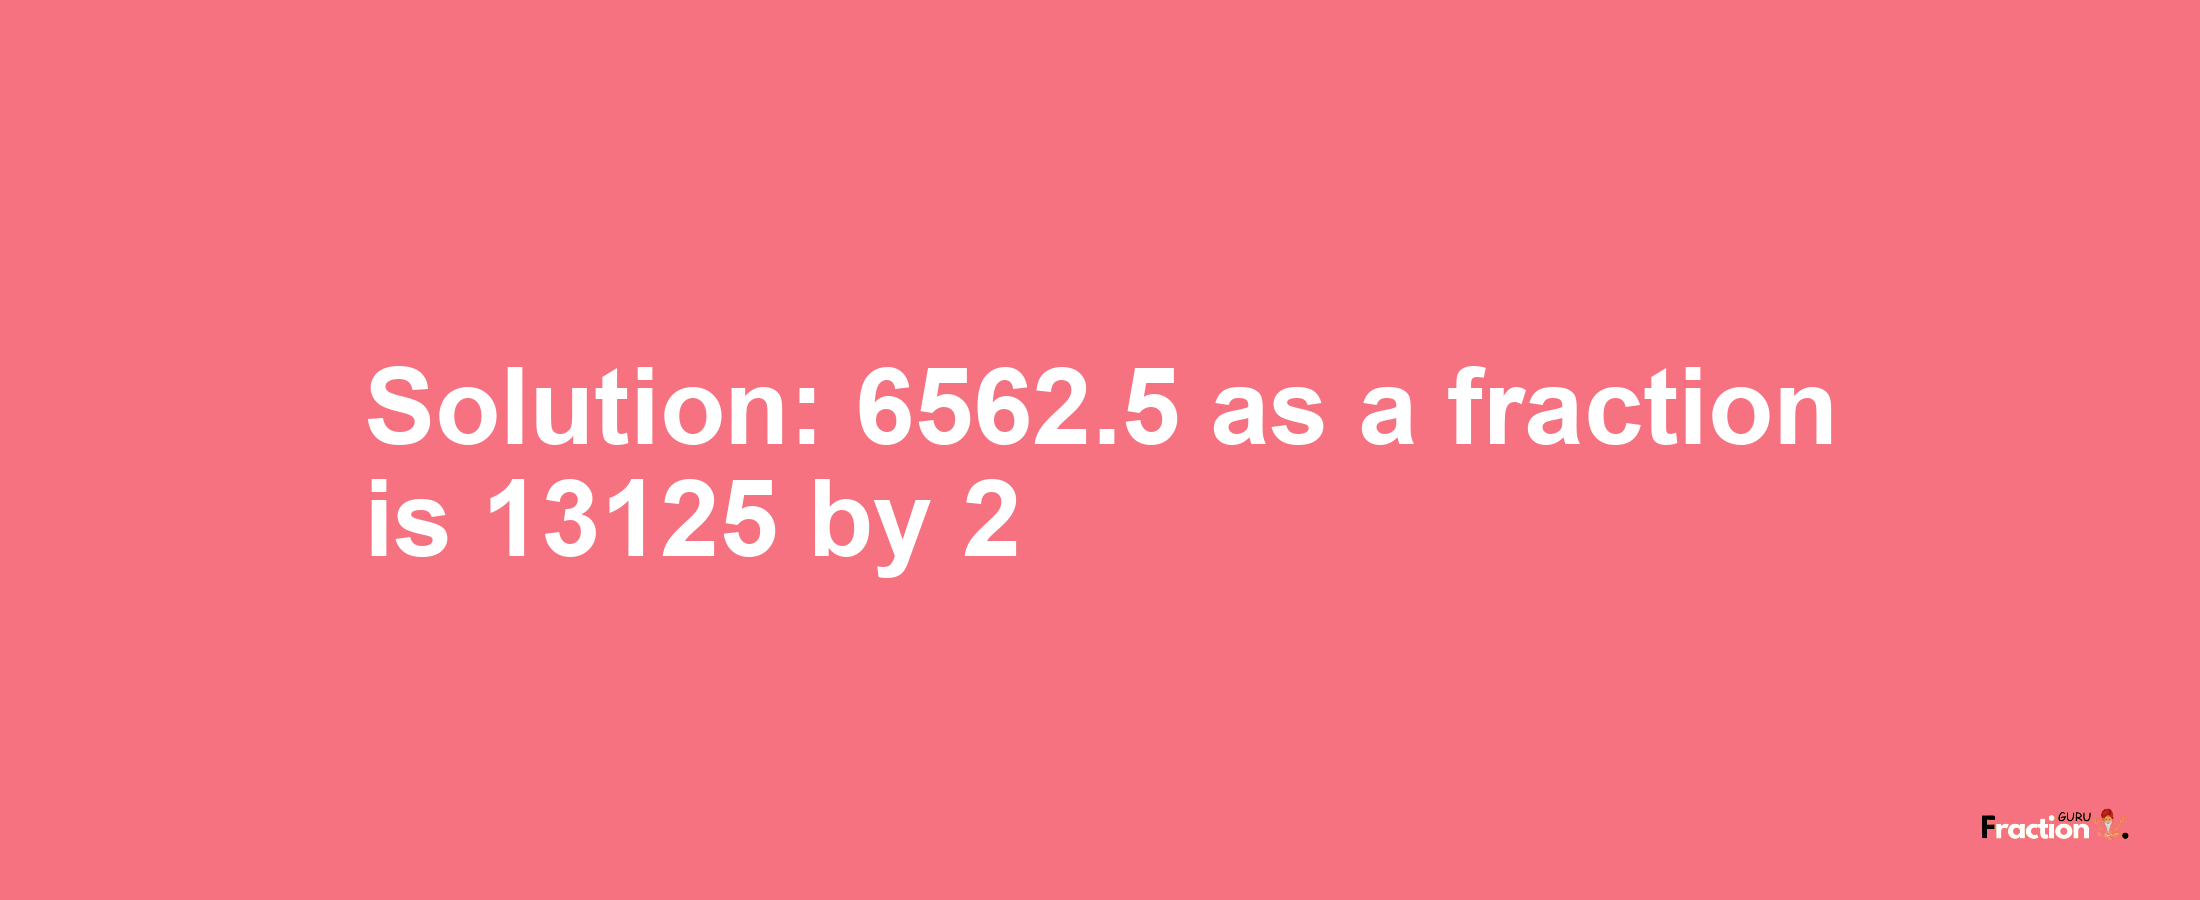 Solution:6562.5 as a fraction is 13125/2